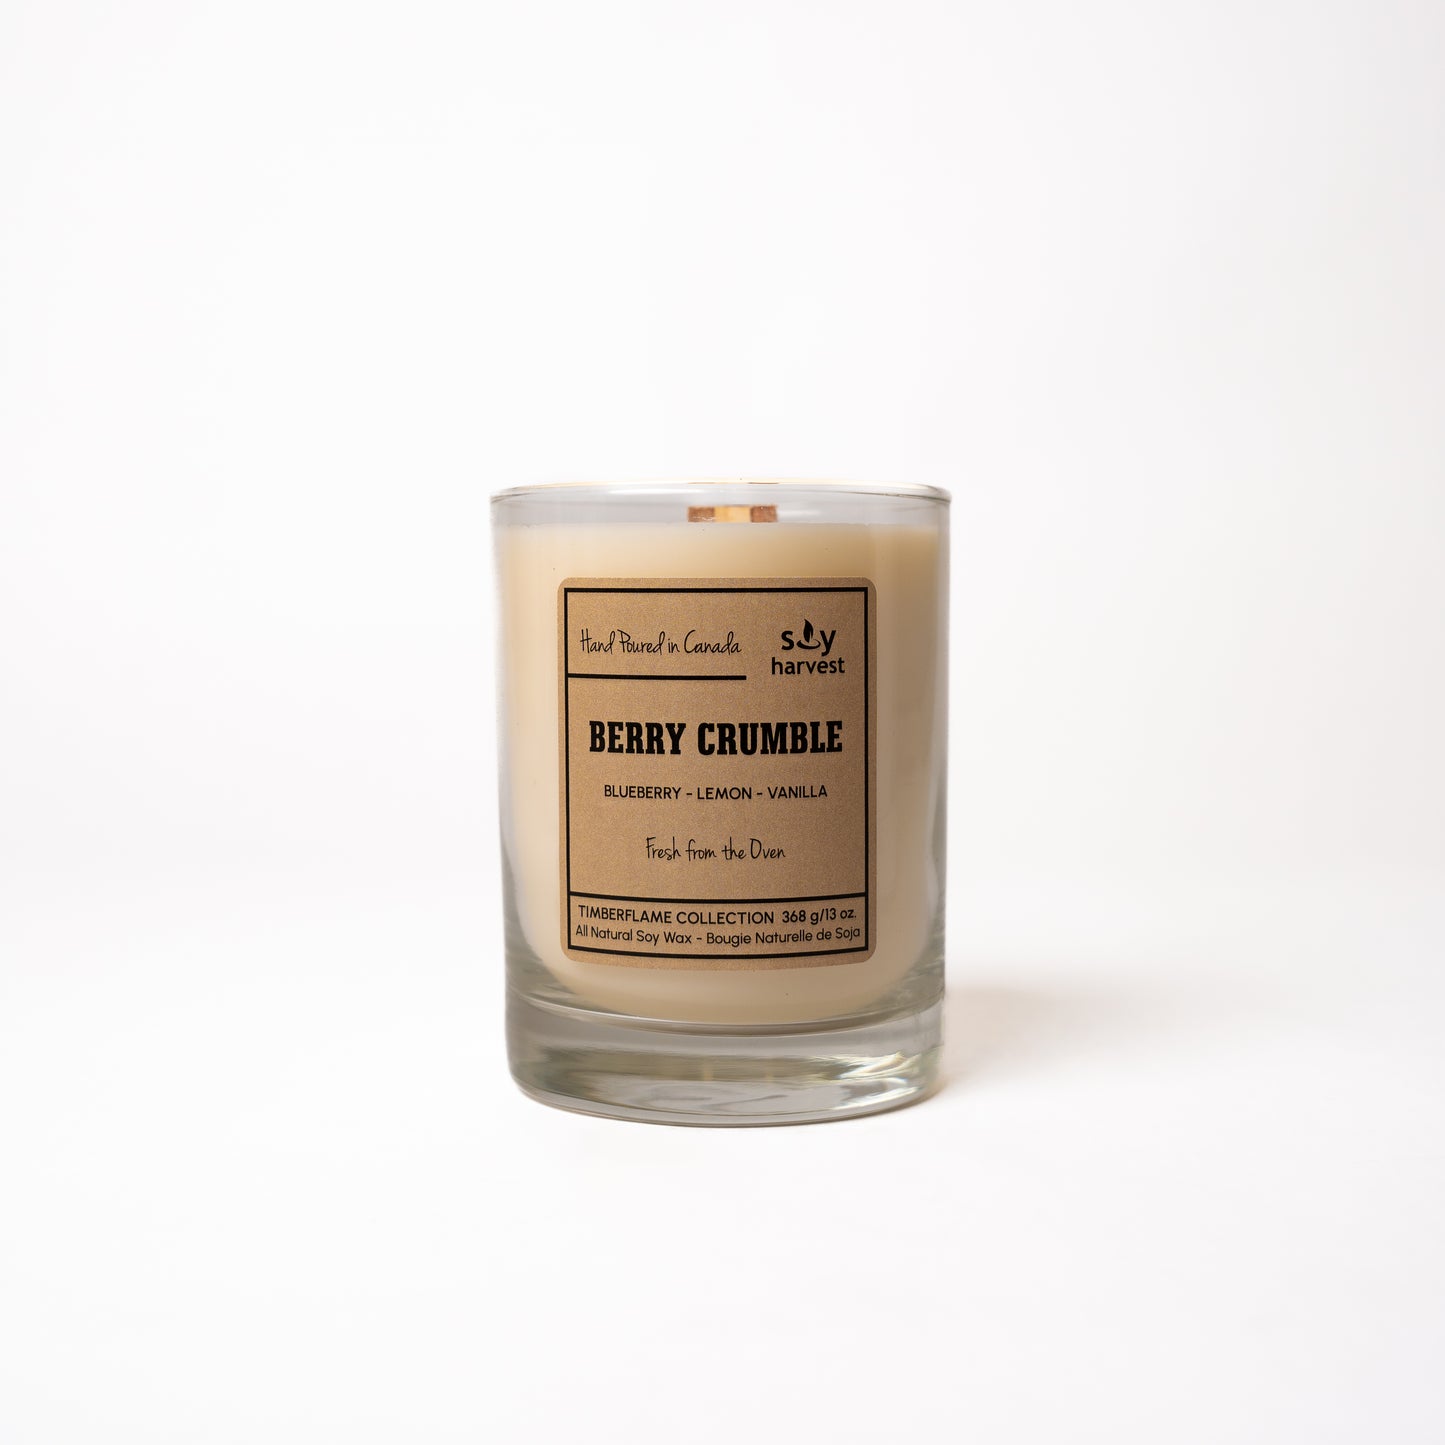 Timberflame Candle | Berry Crumble